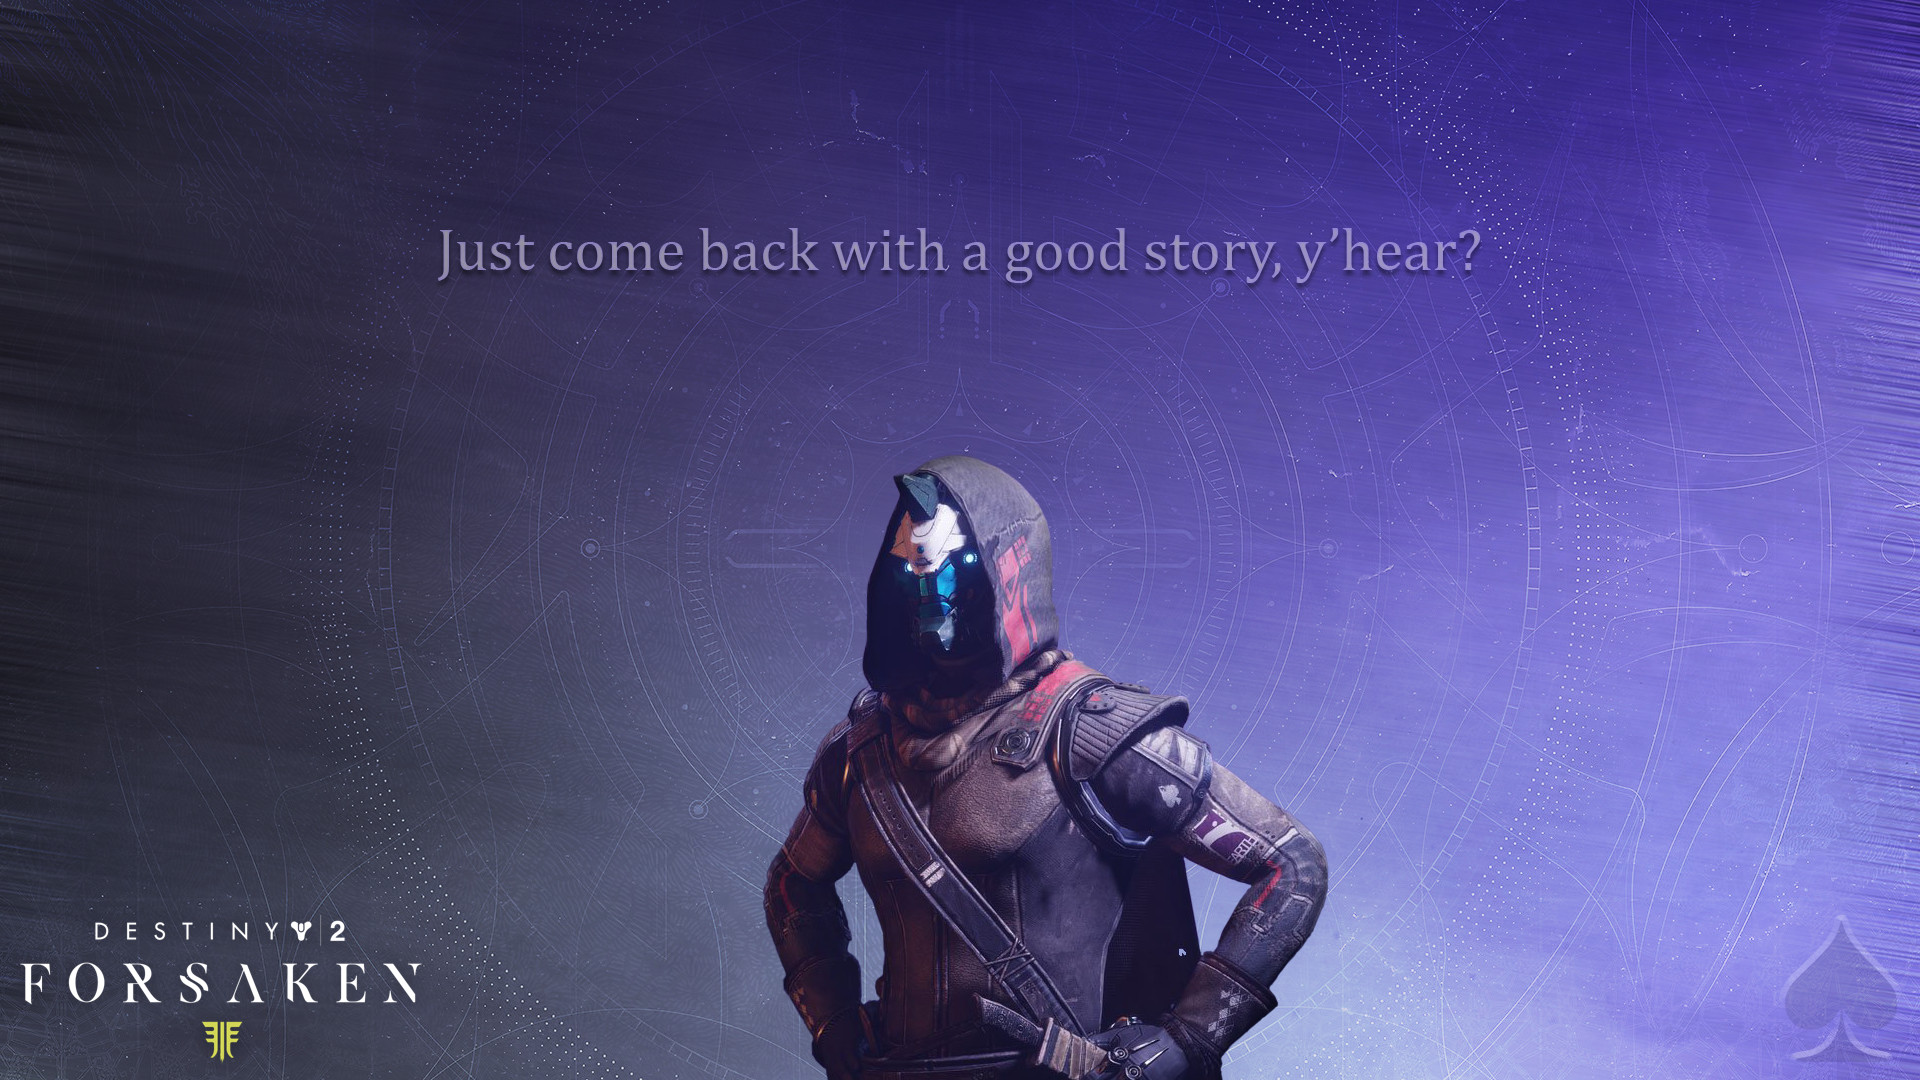 I searched through popular Cayde-6 quotes and this one just seemed to be th...